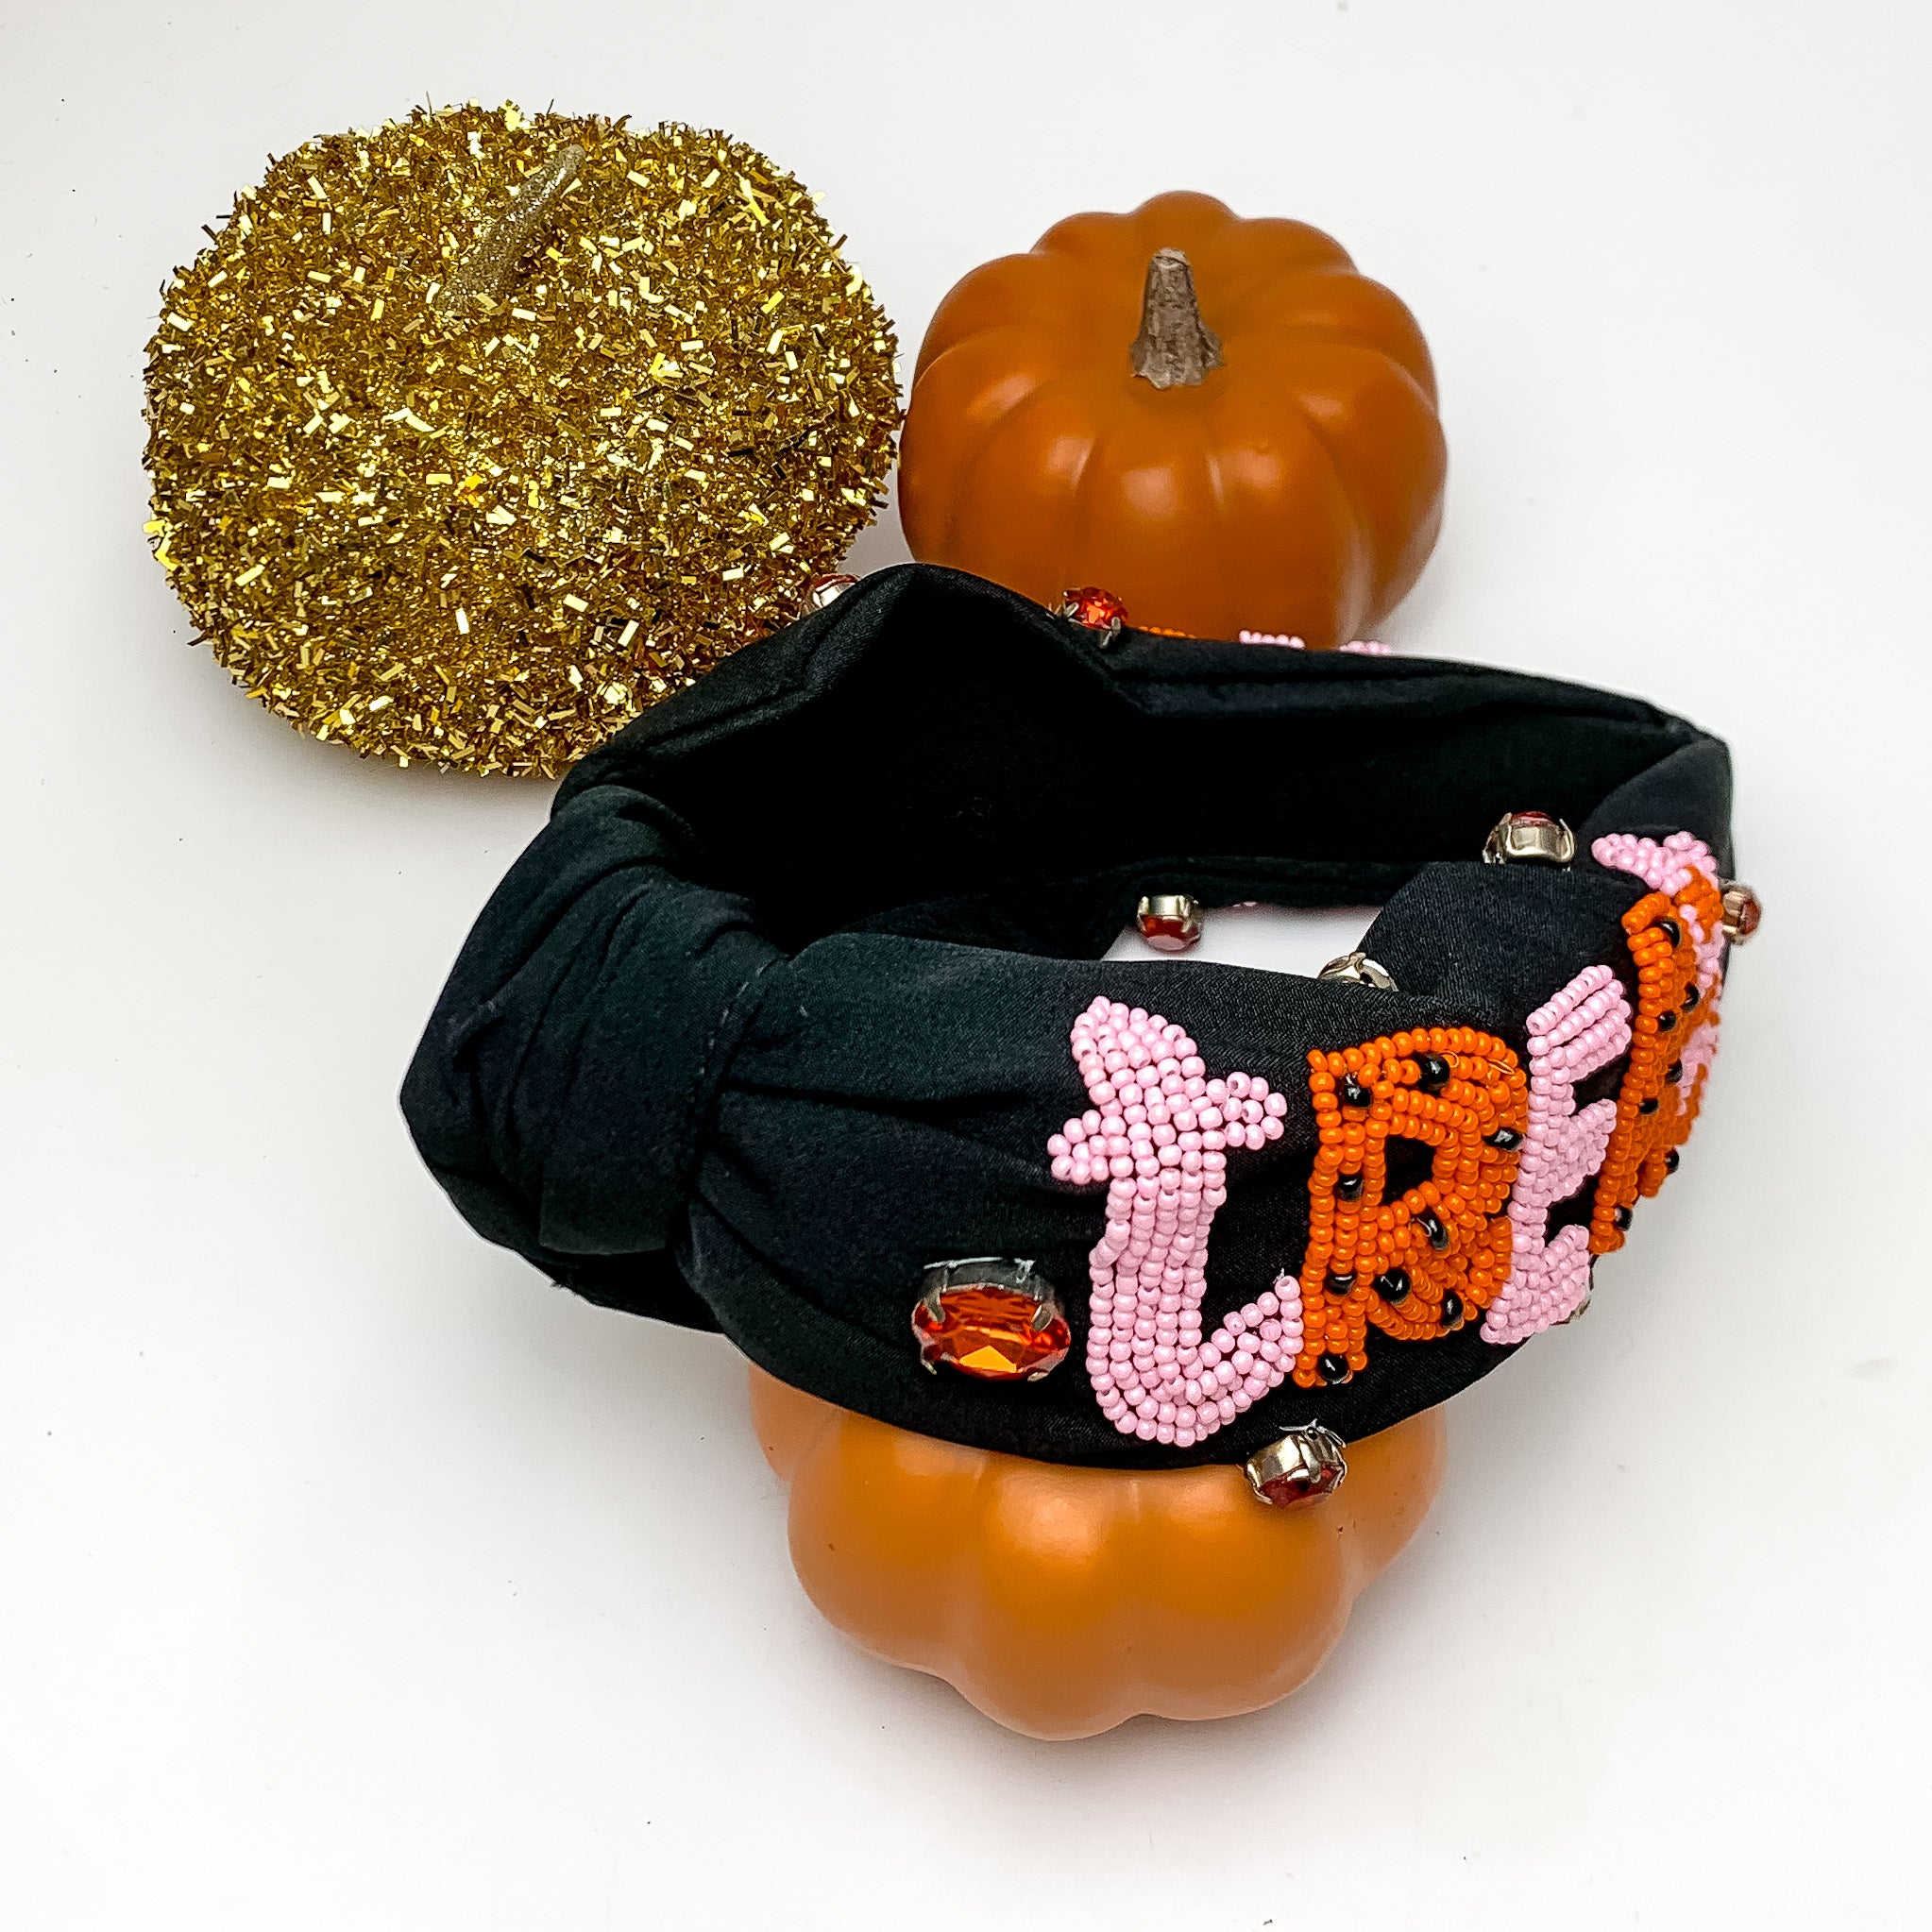 "Trick or Treat" Orange and Pink Beaded Headband in Black. This headband is pictured on a white background with pumpkins around the headband for decoration. 